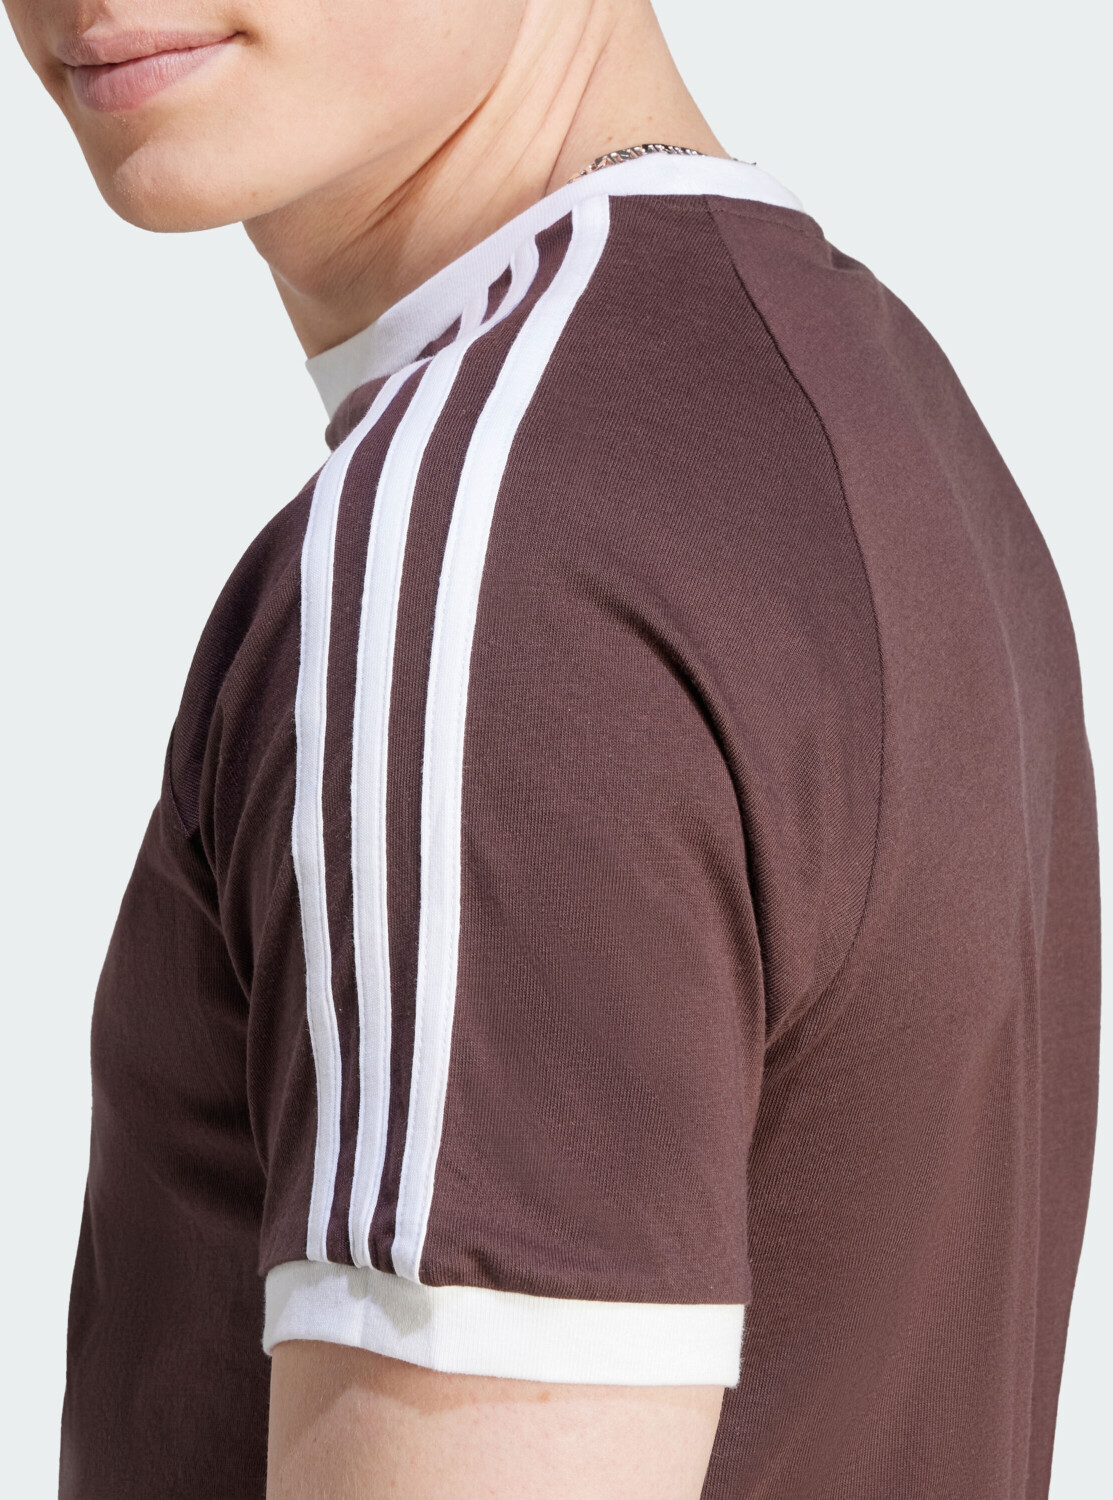 Buy Adidas adicolor Classics 3-Stripes T-Shirt shadow brown (IM2077) from  £24.00 (Today) – Best Deals on